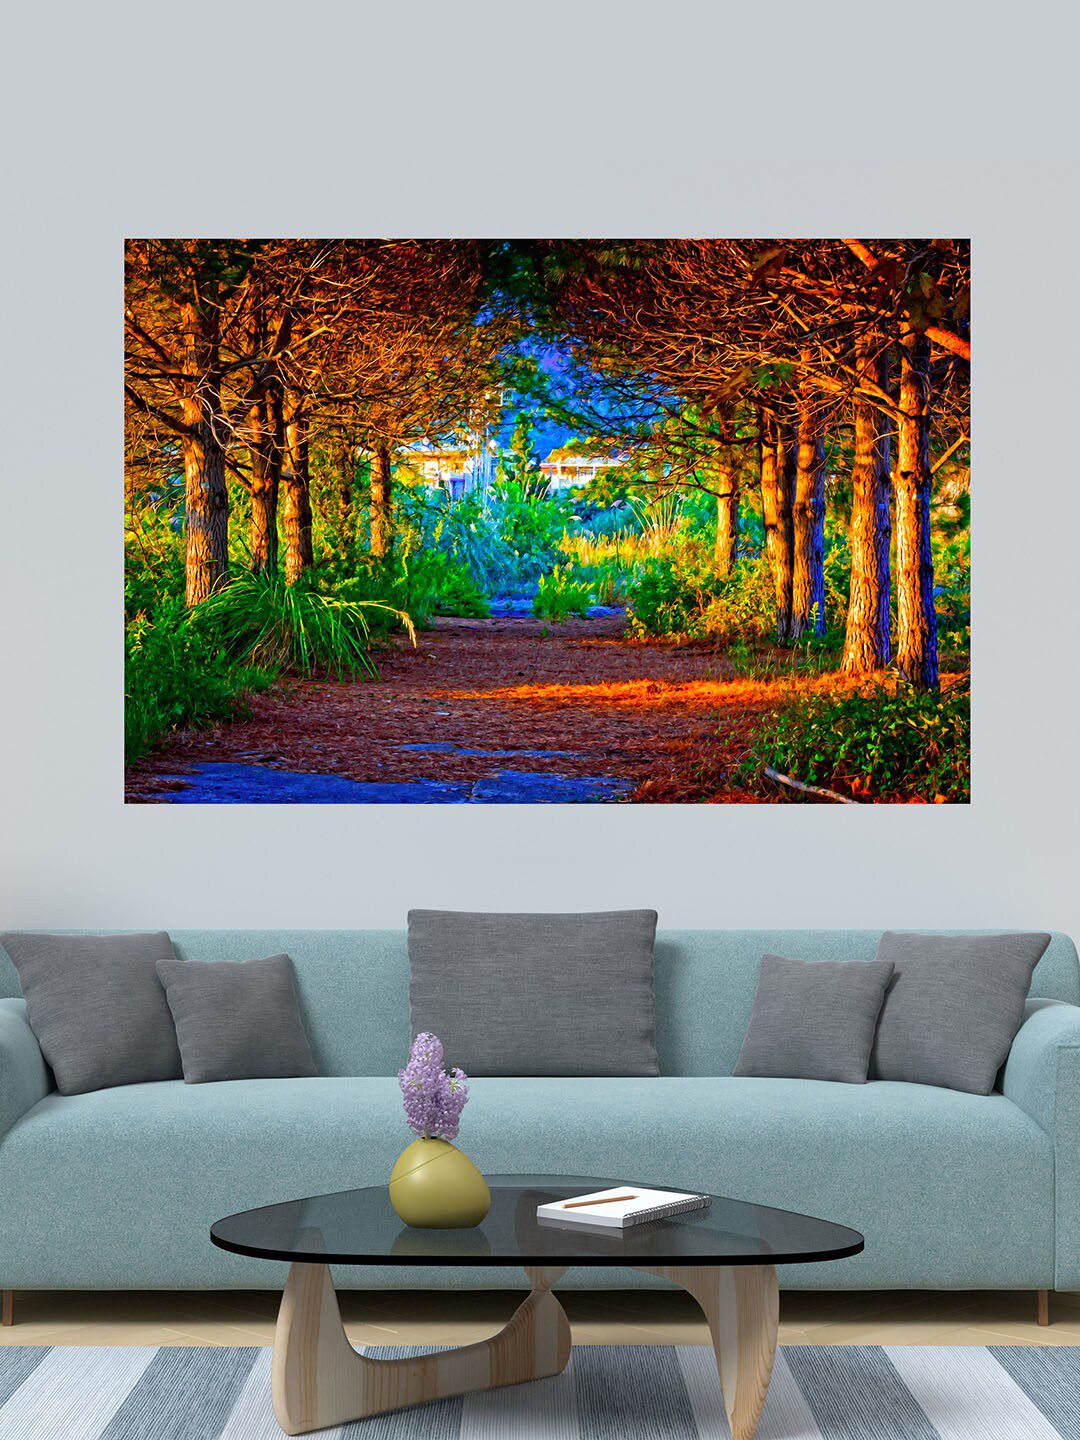 WENS Multicoloured Attractive Colorful Nature Art Printed Vinyl Wall Sticker Price in India